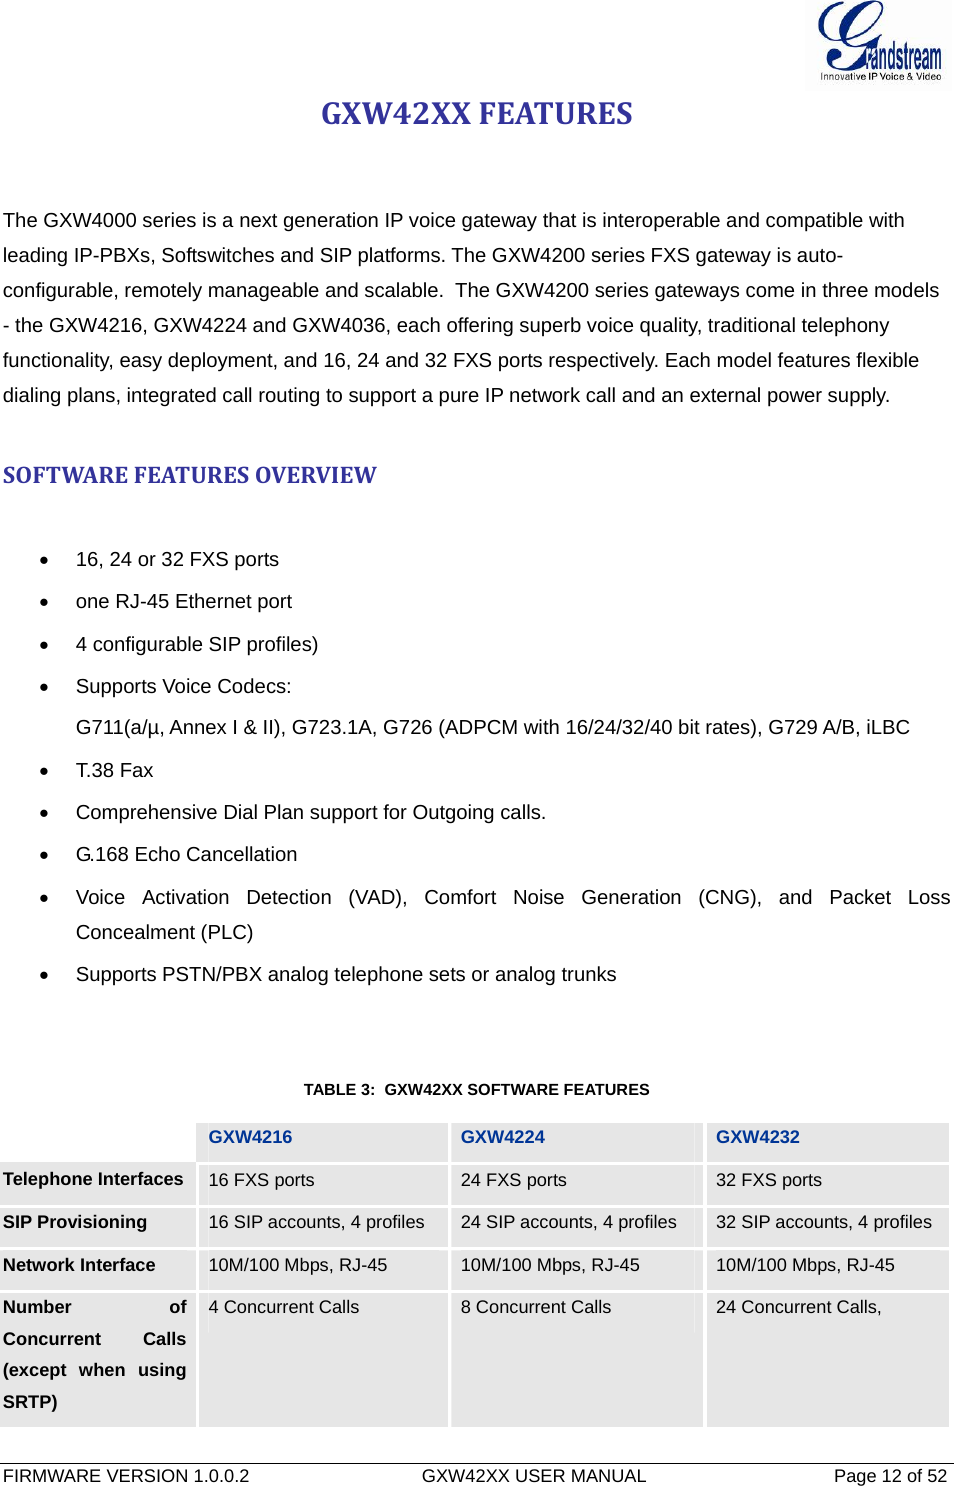  FIRMWARE VERSION 1.0.0.2                                  GXW42XX USER MANUAL                                     Page 12 of 52   GXW42XXFEATURESThe GXW4000 series is a next generation IP voice gateway that is interoperable and compatible with leading IP-PBXs, Softswitches and SIP platforms. The GXW4200 series FXS gateway is auto-configurable, remotely manageable and scalable.  The GXW4200 series gateways come in three models - the GXW4216, GXW4224 and GXW4036, each offering superb voice quality, traditional telephony functionality, easy deployment, and 16, 24 and 32 FXS ports respectively. Each model features flexible dialing plans, integrated call routing to support a pure IP network call and an external power supply.   SOFTWAREFEATURESOVERVIEW•  16, 24 or 32 FXS ports •  one RJ-45 Ethernet port  •  4 configurable SIP profiles) •  Supports Voice Codecs:  G711(a/µ, Annex I &amp; II), G723.1A, G726 (ADPCM with 16/24/32/40 bit rates), G729 A/B, iLBC •  T.38 Fax  •  Comprehensive Dial Plan support for Outgoing calls. •  G.168 Echo Cancellation •  Voice Activation Detection (VAD), Comfort Noise Generation (CNG), and Packet Loss Concealment (PLC) •  Supports PSTN/PBX analog telephone sets or analog trunks   TABLE 3:  GXW42XX SOFTWARE FEATURES   GXW4216  GXW4224  GXW4232 Telephone Interfaces  16 FXS ports 24 FXS ports 32 FXS ports SIP Provisioning  16 SIP accounts, 4 profiles 24 SIP accounts, 4 profiles 32 SIP accounts, 4 profilesNetwork Interface  10M/100 Mbps, RJ-45 10M/100 Mbps, RJ-45 10M/100 Mbps, RJ-45 Number of Concurrent Calls (except when using SRTP) 4 Concurrent Calls  8 Concurrent Calls  24 Concurrent Calls,  